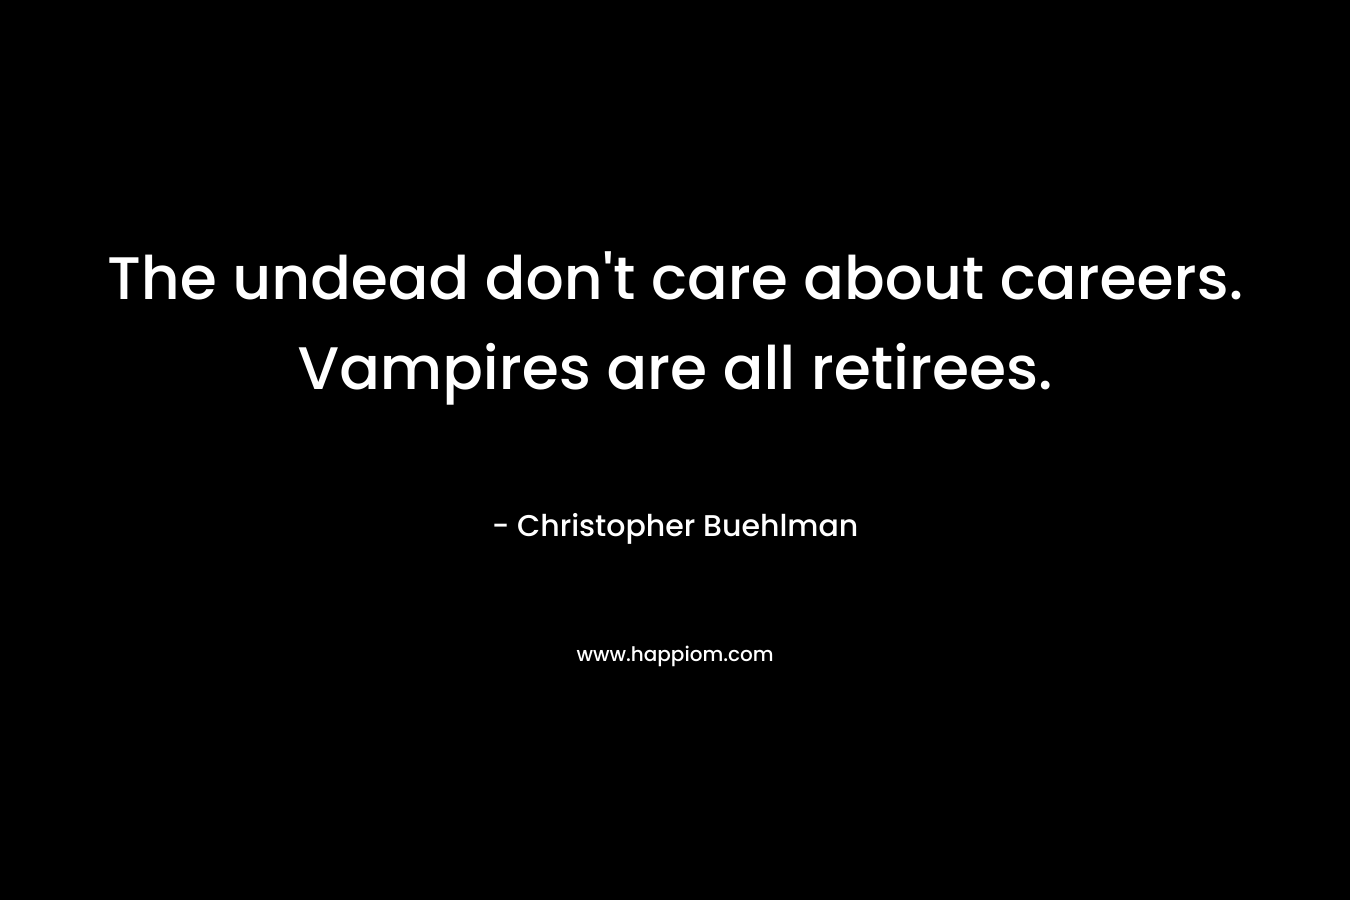 The undead don’t care about careers. Vampires are all retirees. – Christopher Buehlman